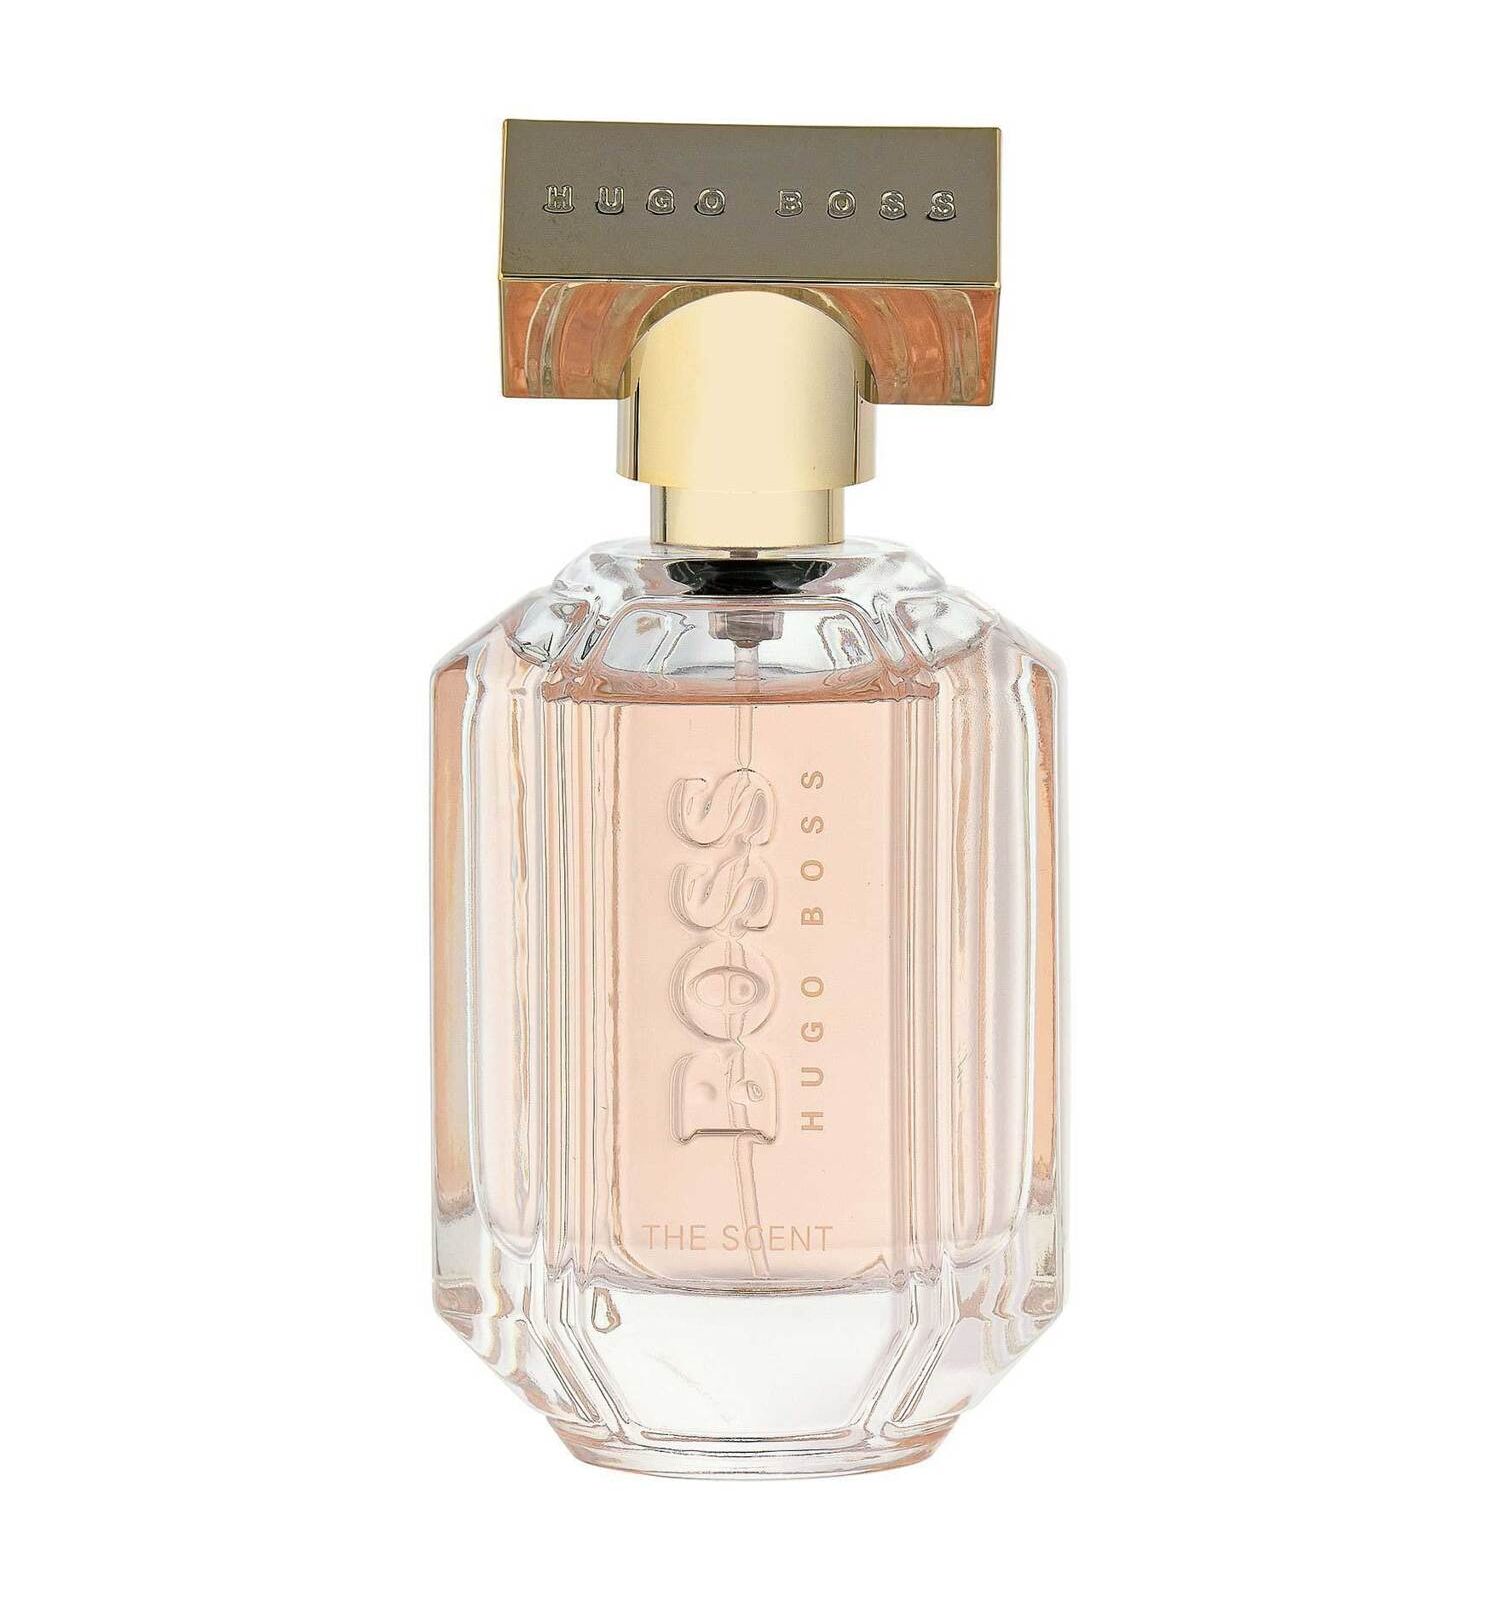 Boss for her парфюмерная вода. Hugo Boss the Scent for her (100 мл.). Hugo Boss the Scent for her 50 ml. Hugo Boss the Scent for her EDP, 100 ml. Hugo Boss the Scent for her Eau de Parfum.